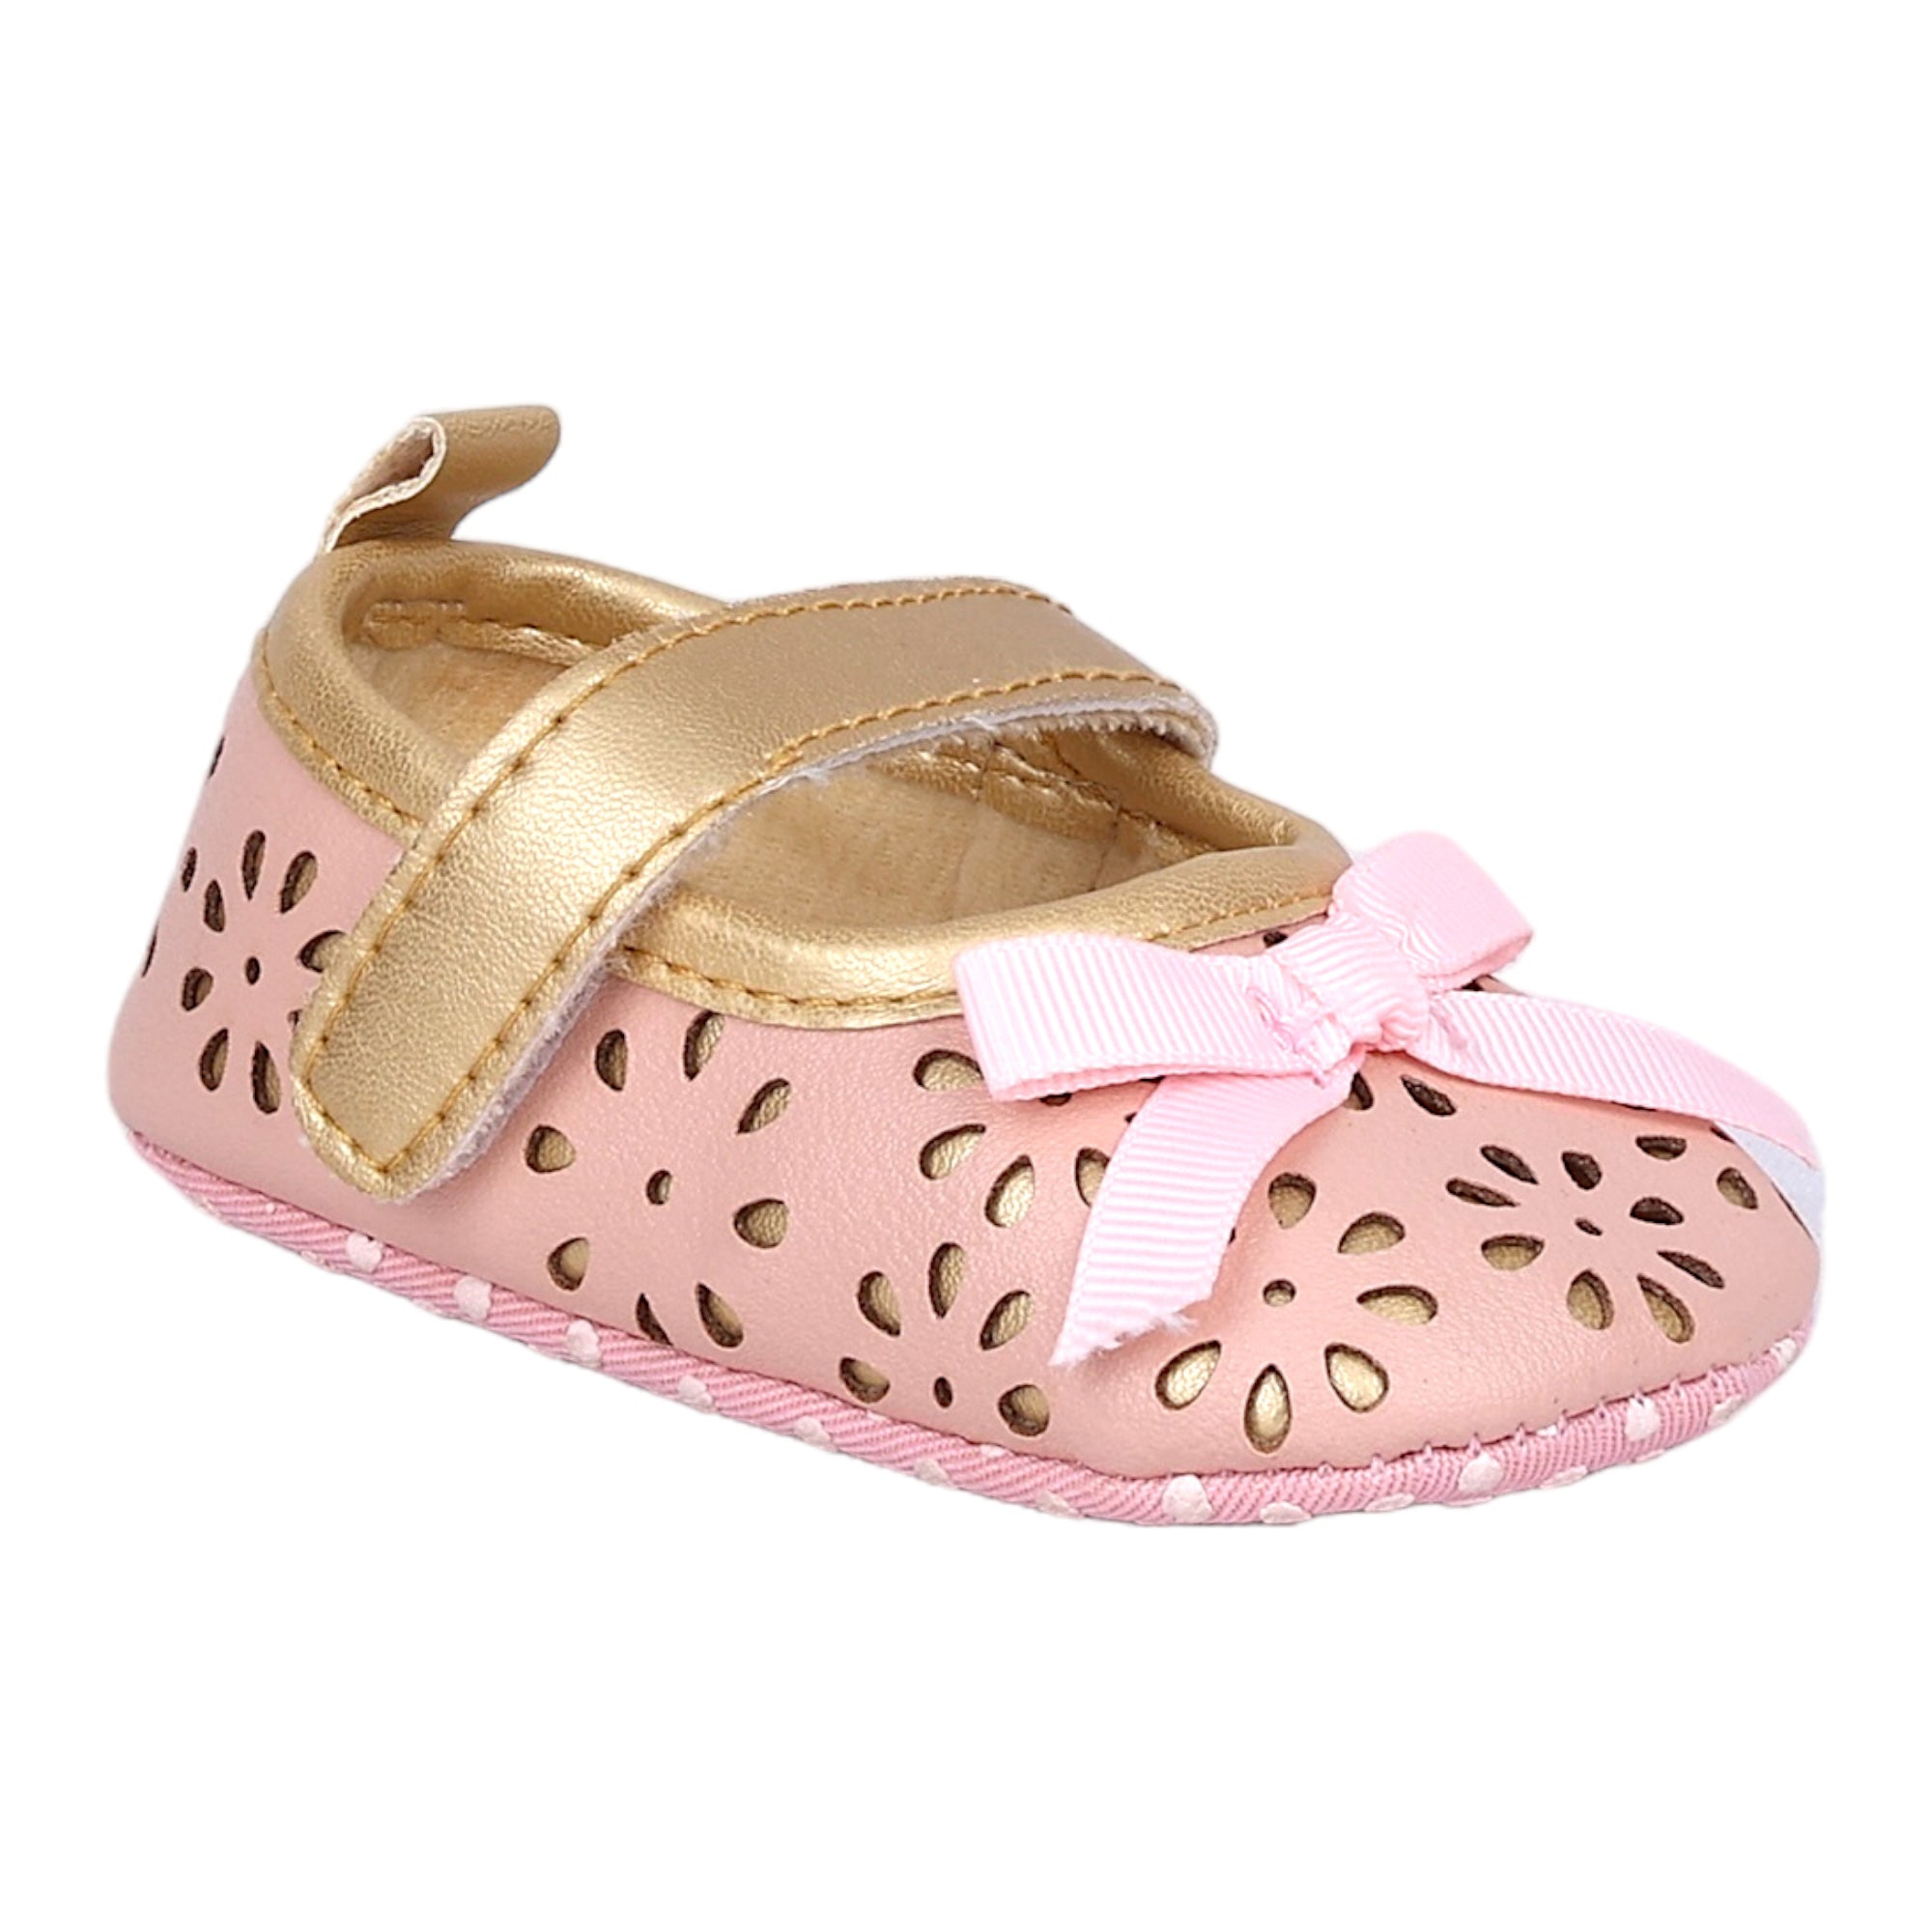 Baby Moo Flower Cut-Out Bow Velcro Strap Anti-Skid Ballerina Booties - Pink